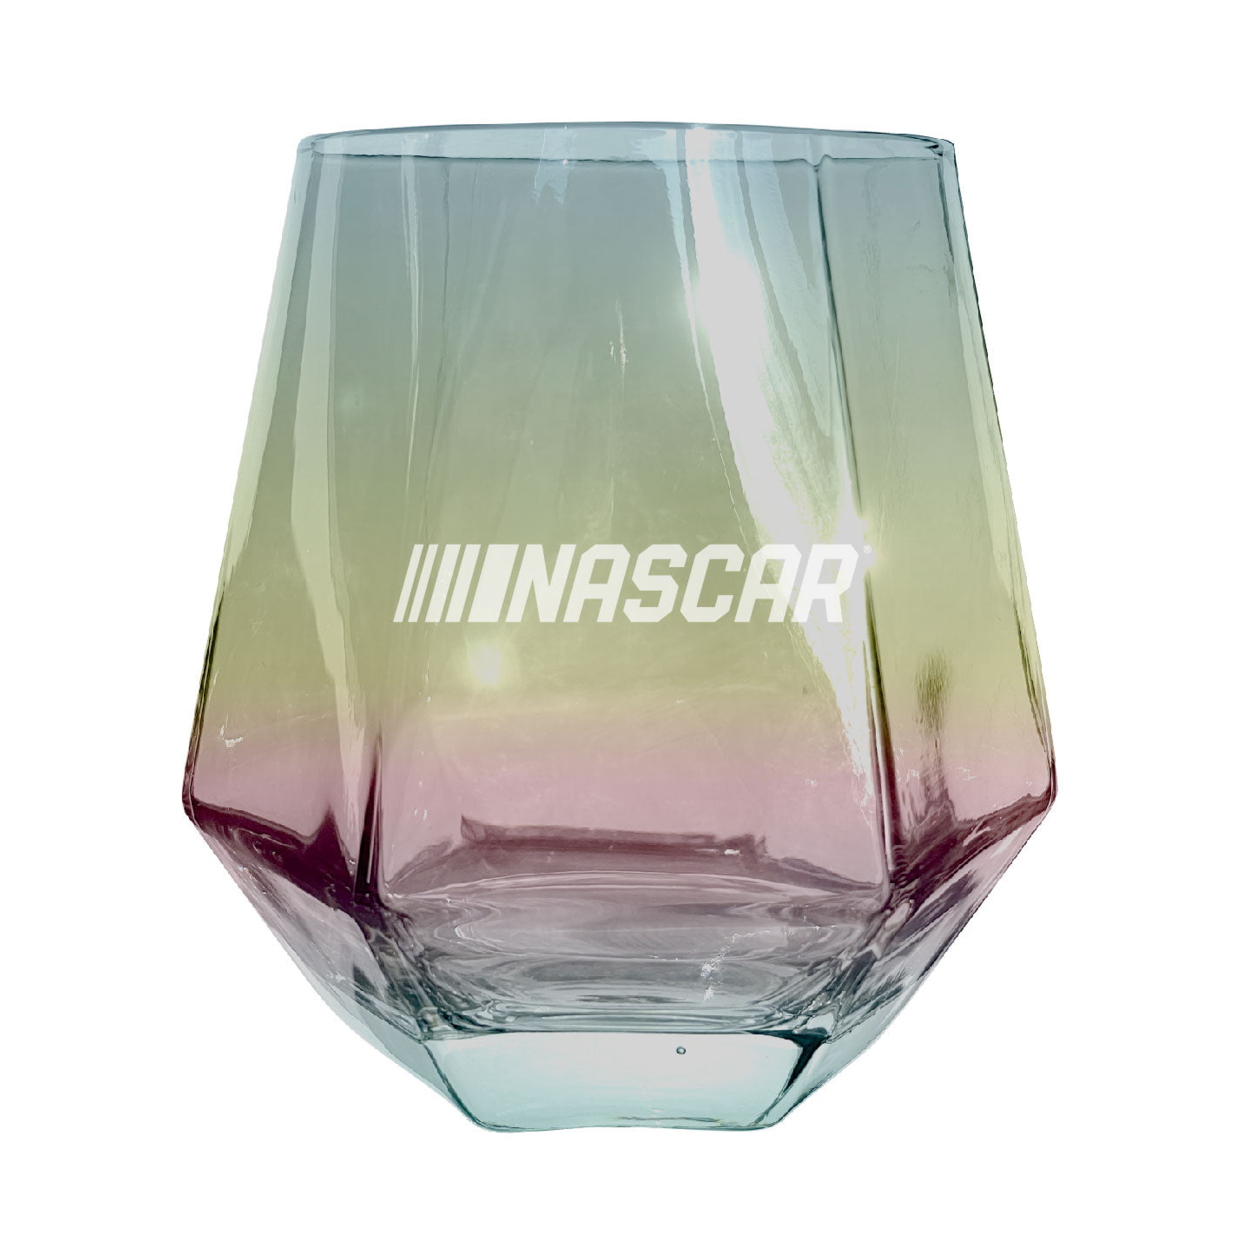 NASCAR Officially Licensed 10 Oz Engraved Diamond Wine Glass - Iridescent, 2-Pack